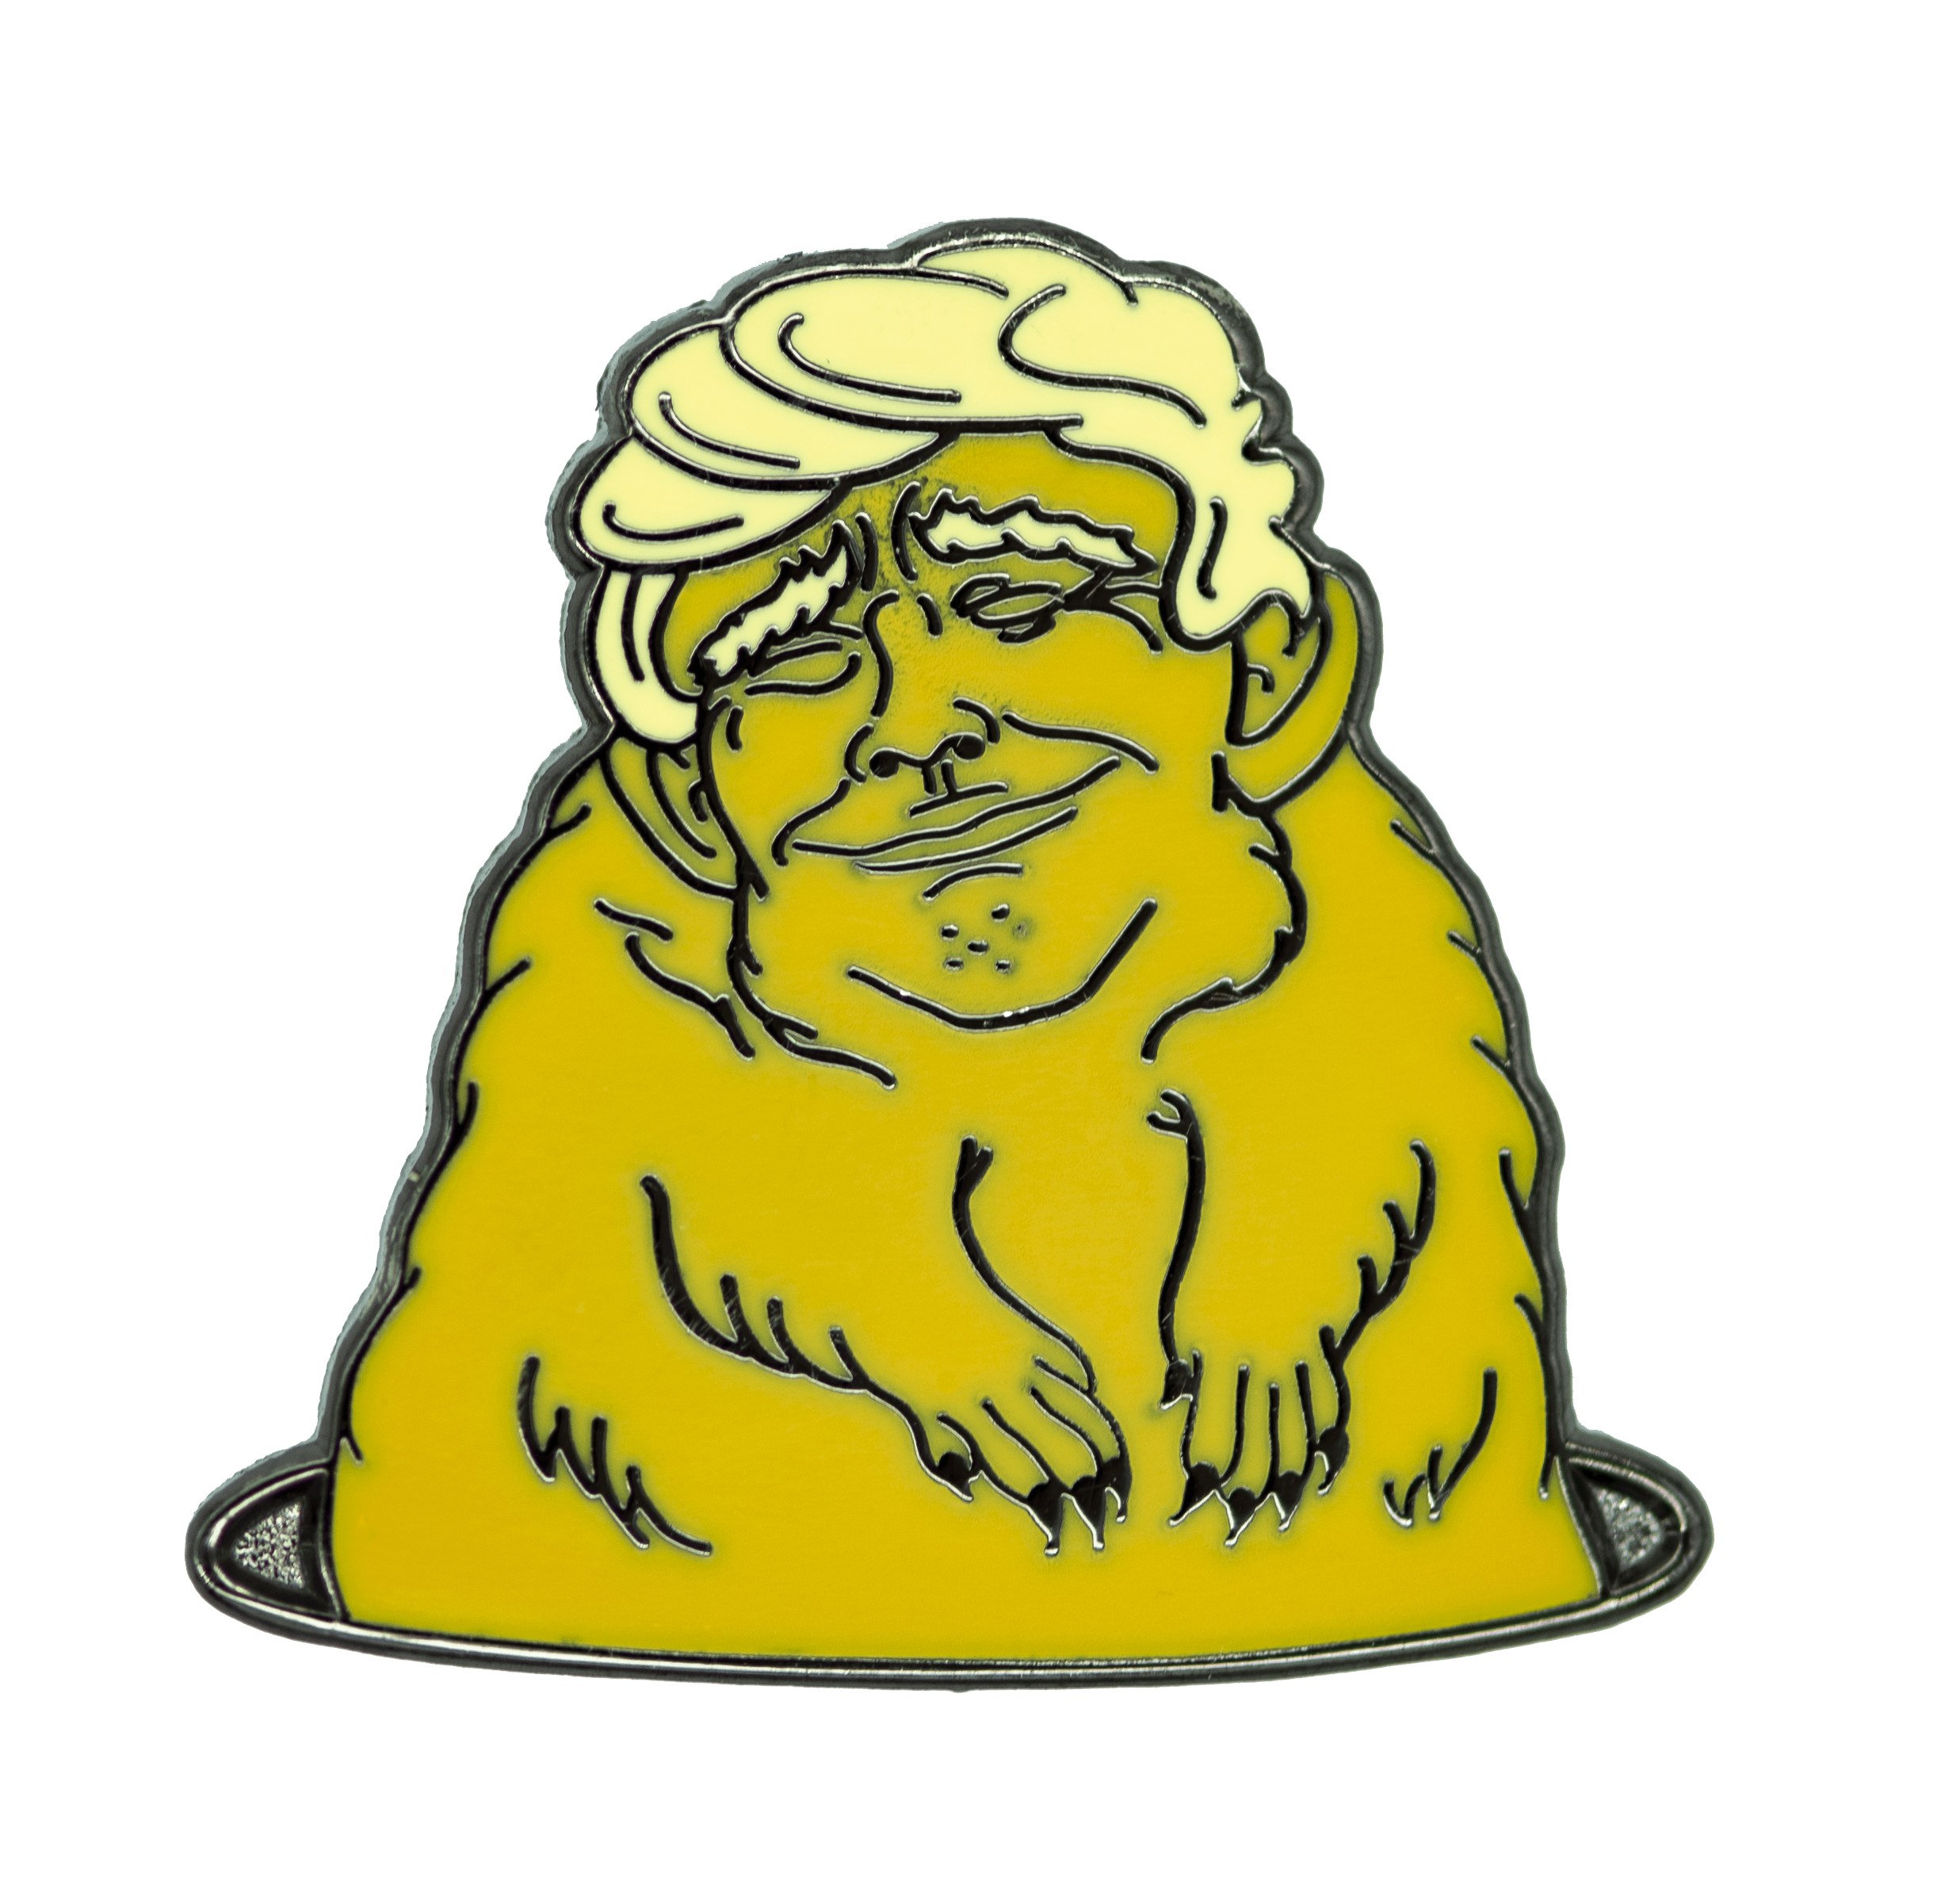 An enamel pin of an orange gopher with the face of Donald Trump, popping out of a hole.